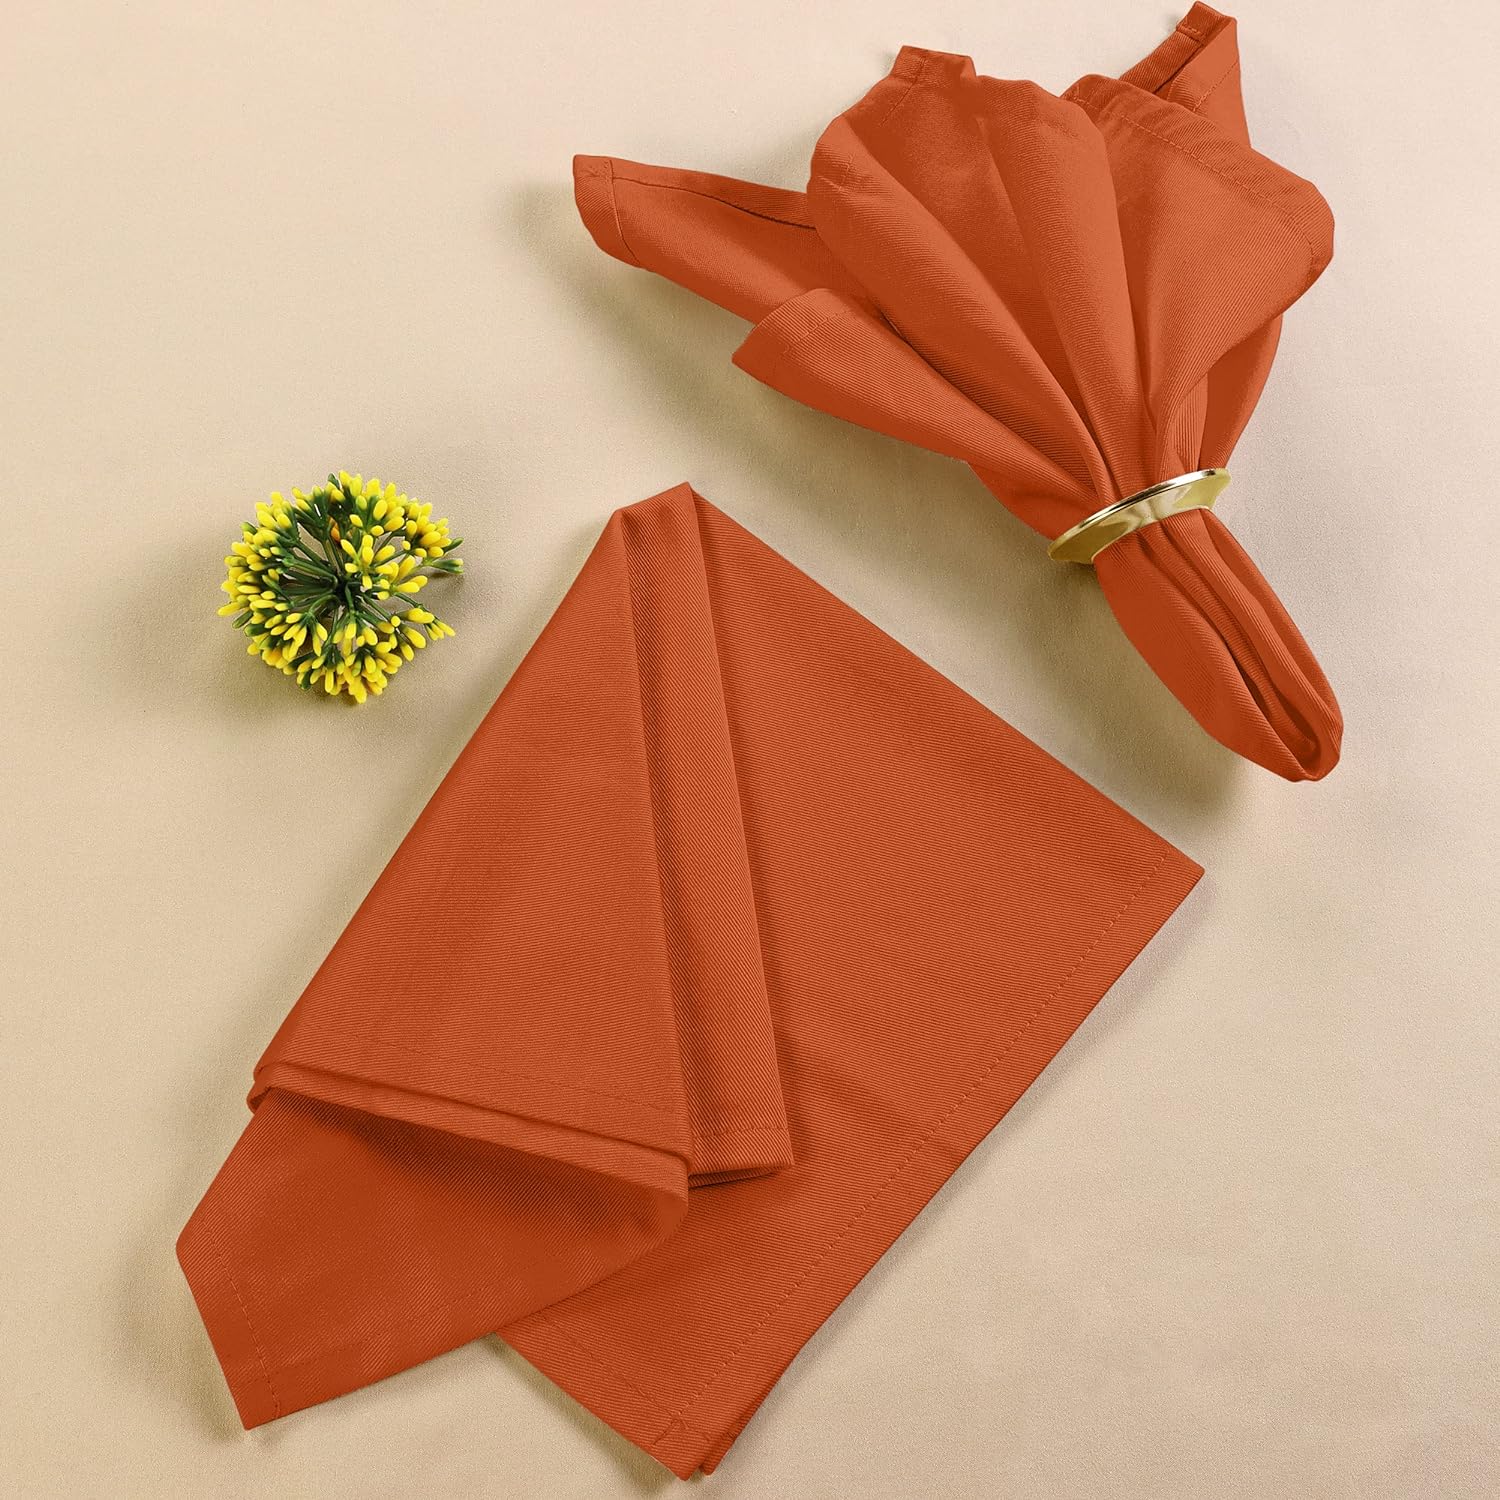 Utopia Kitchen Orange Cloth Napkins [12 Pack, 18x18 Inch] Cotton Blend  Washable and Reusable Table Dinner Napkins for Hotel, Lunch, Restaurant